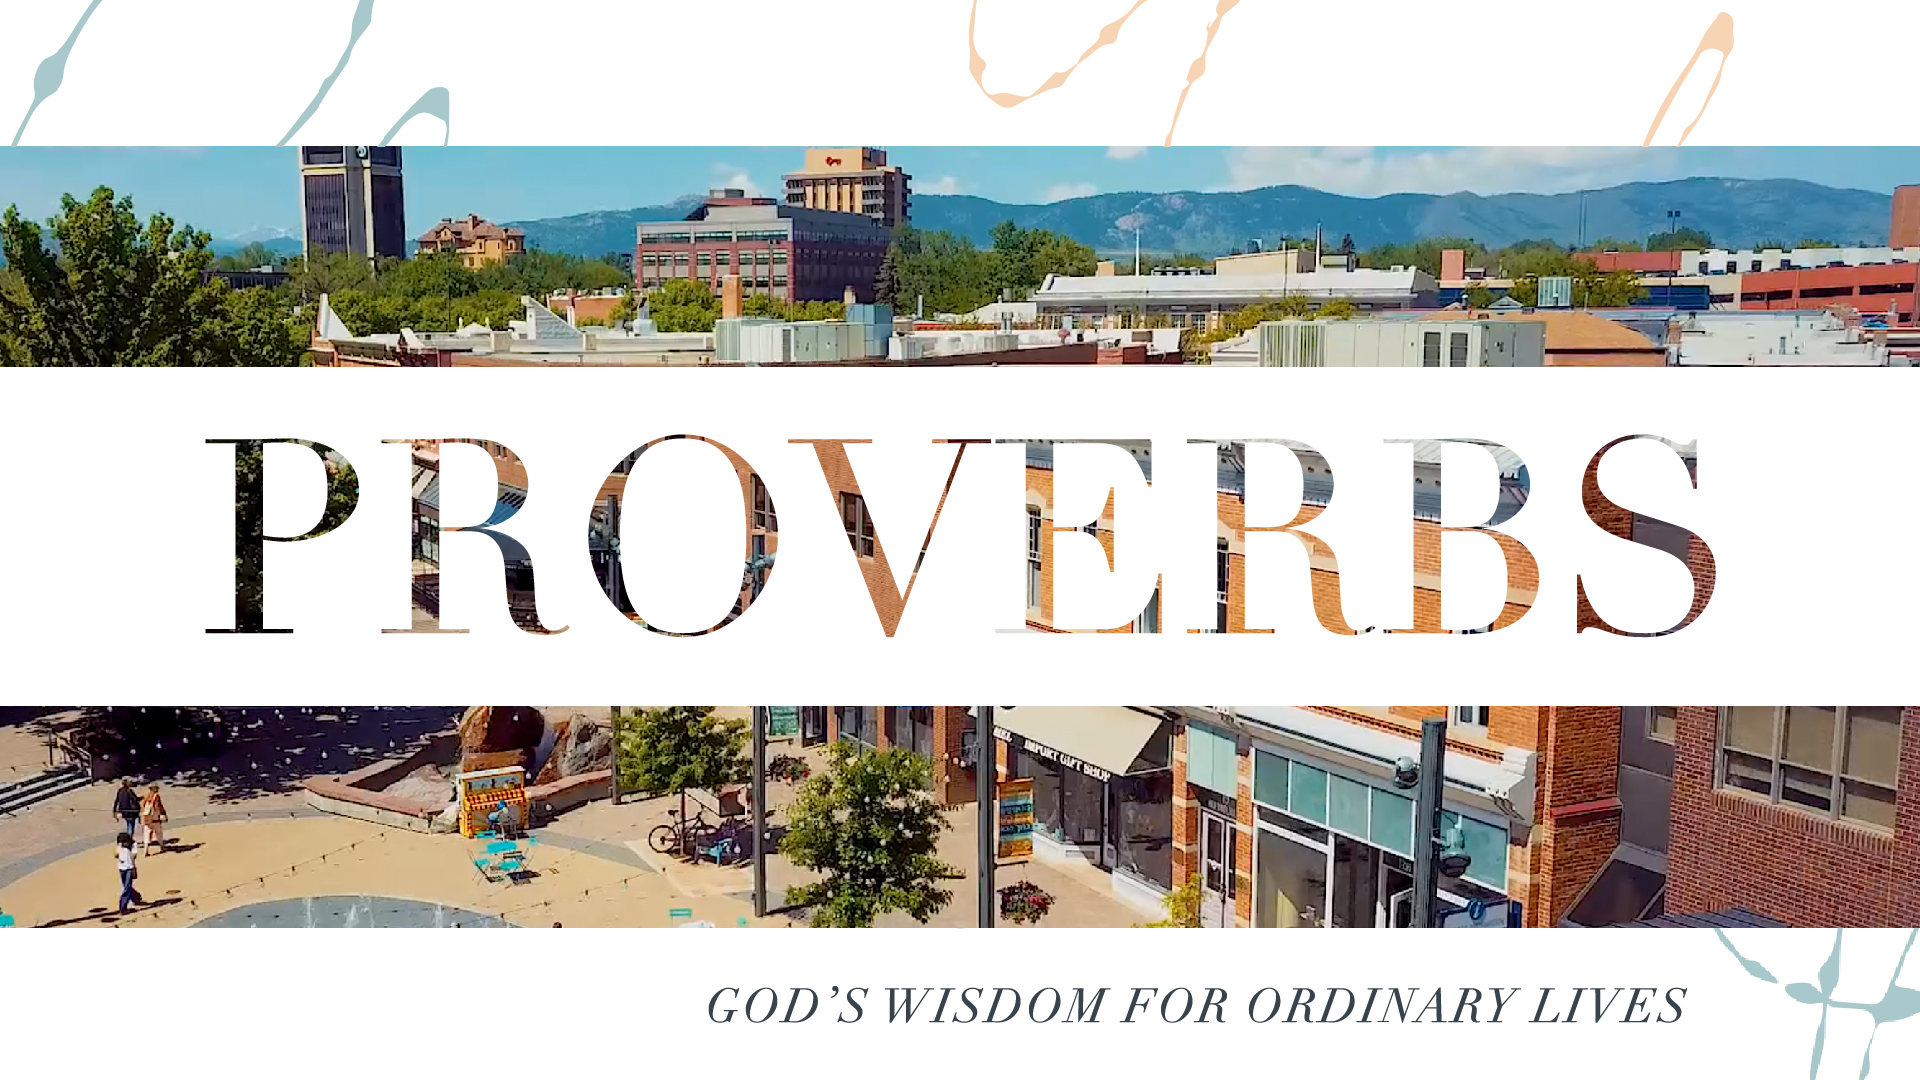 July 29, 2018 | Proverbs 6:6-11 | 